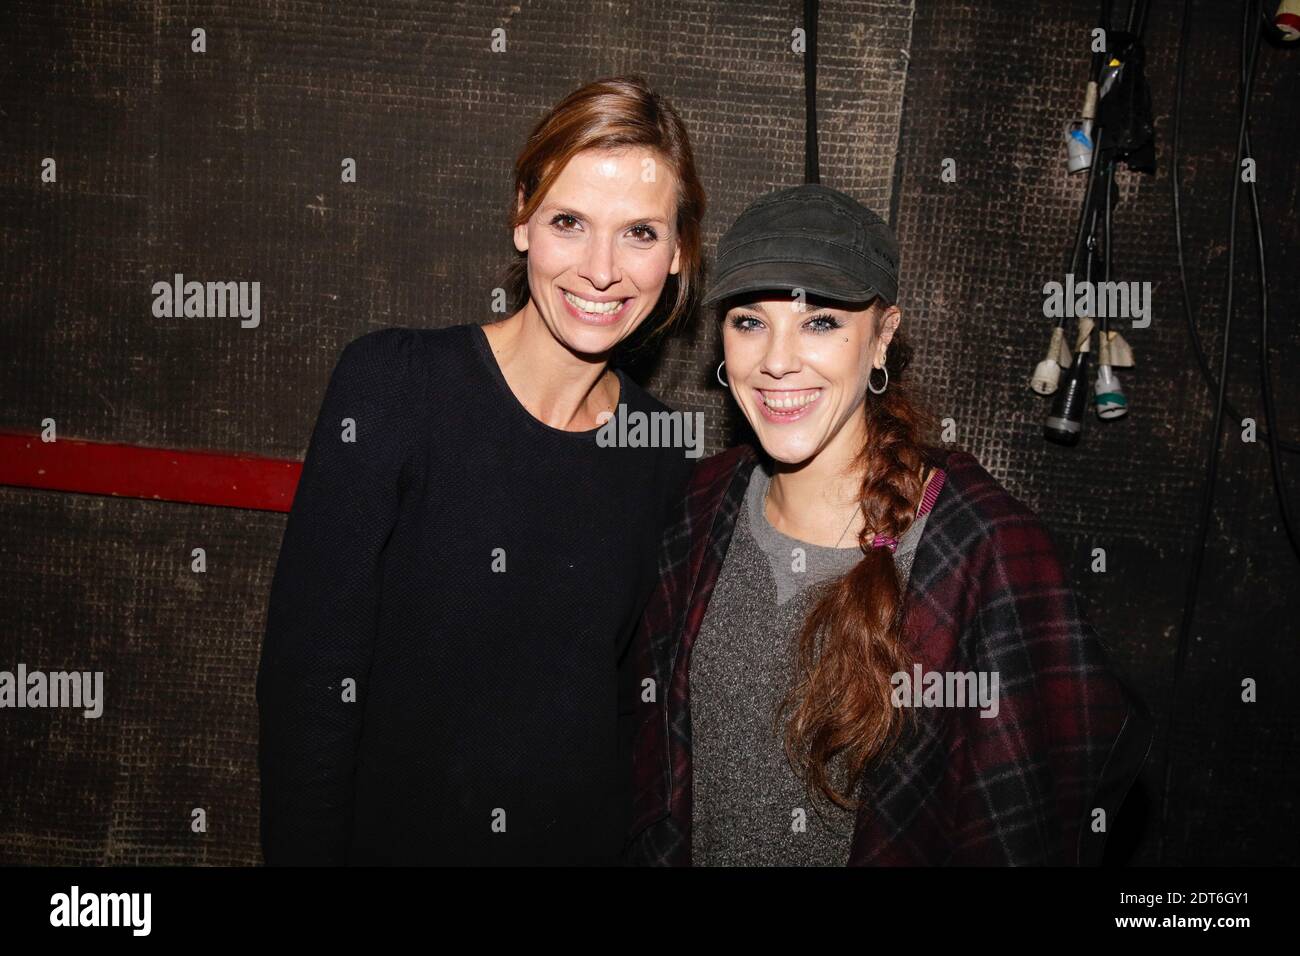 Olga Sekulic and Zaz attending the premiere of 'Jupe Obligatoire' held at ' Theatre du petit Gymnase' in Paris, France on February 10, 2014. Photo by  Jerome Domine/ABACAPRESS.COM Stock Photo - Alamy